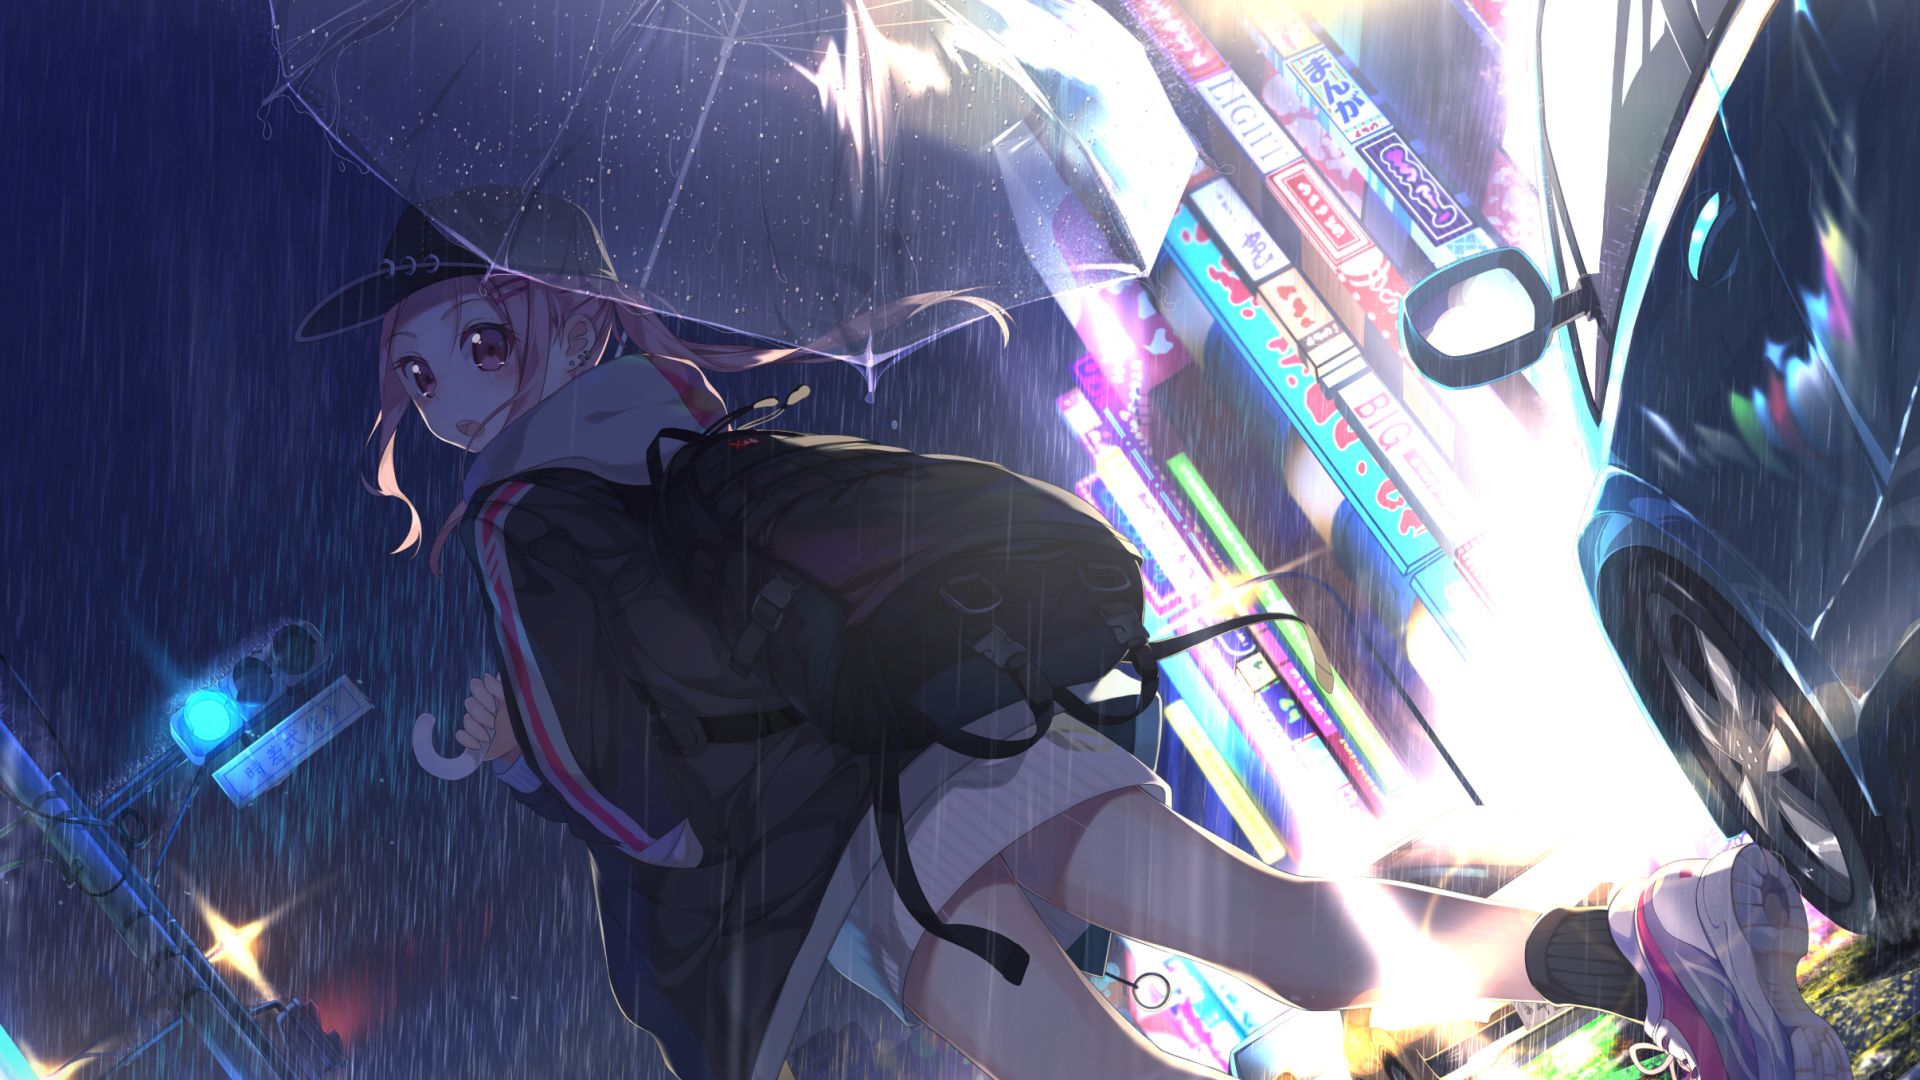 Anime Girl with Umbrella In Rain 1080P Laptop Full HD Wallpaper, HD Anime 4K Wallpaper, Image, Photo and Background